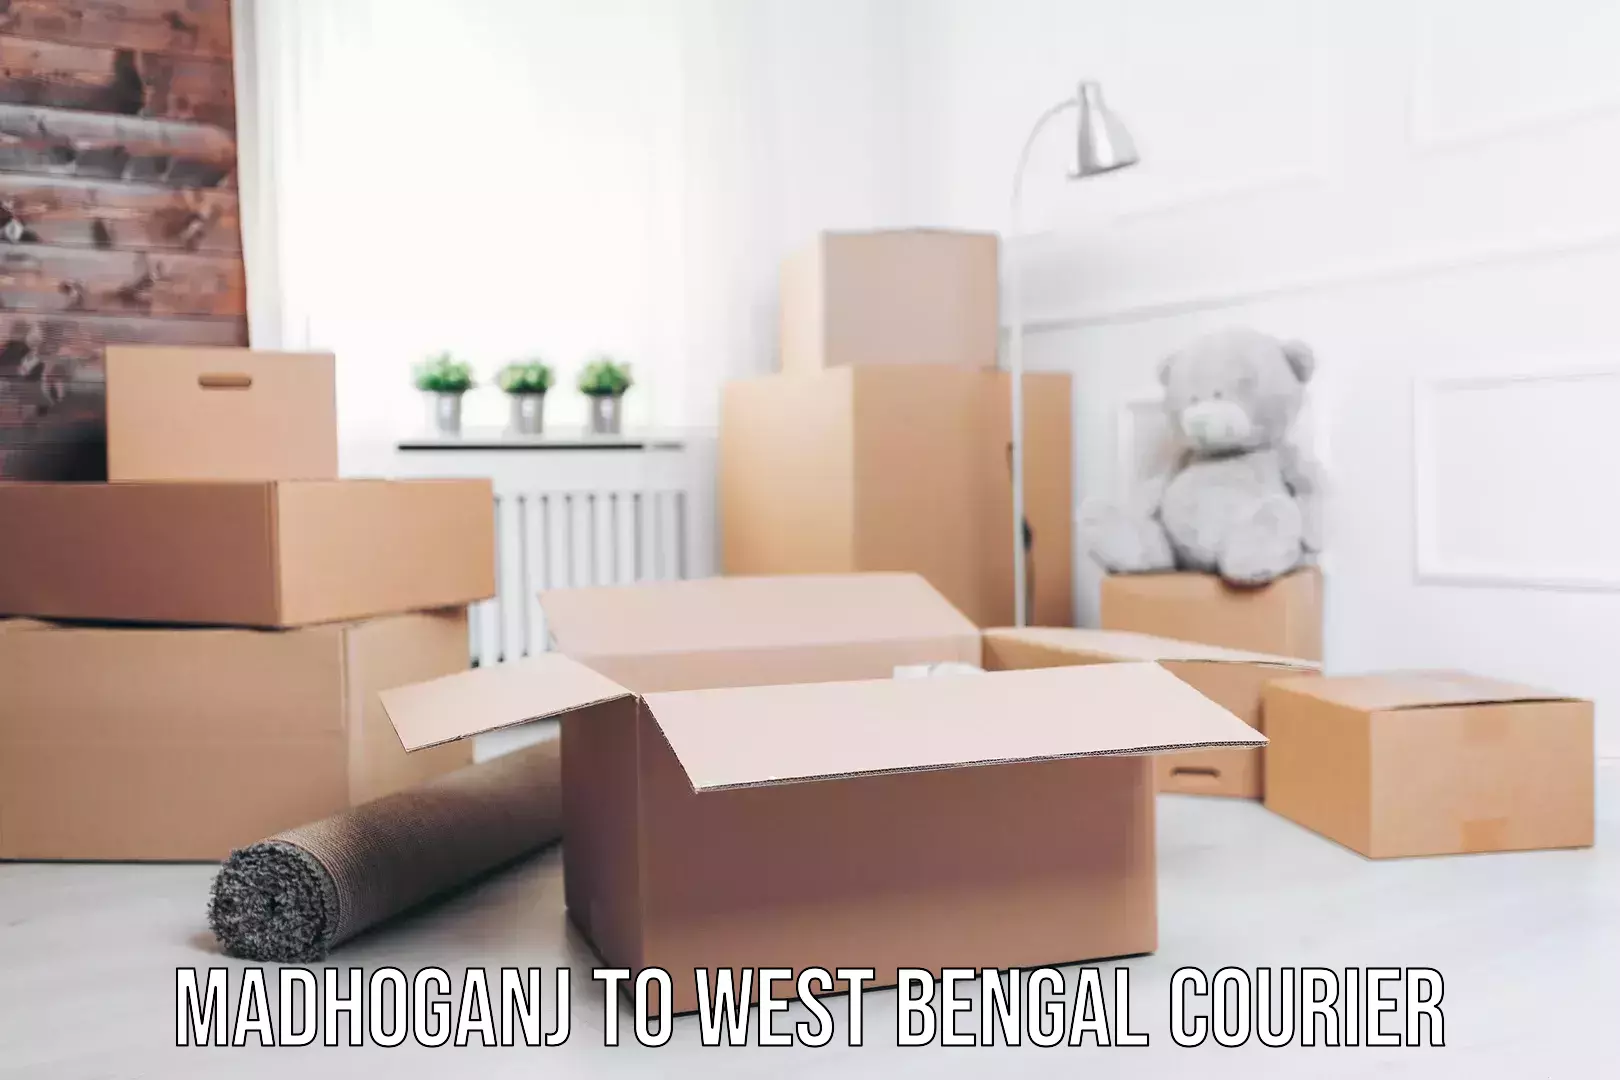 Trusted relocation experts Madhoganj to West Bengal